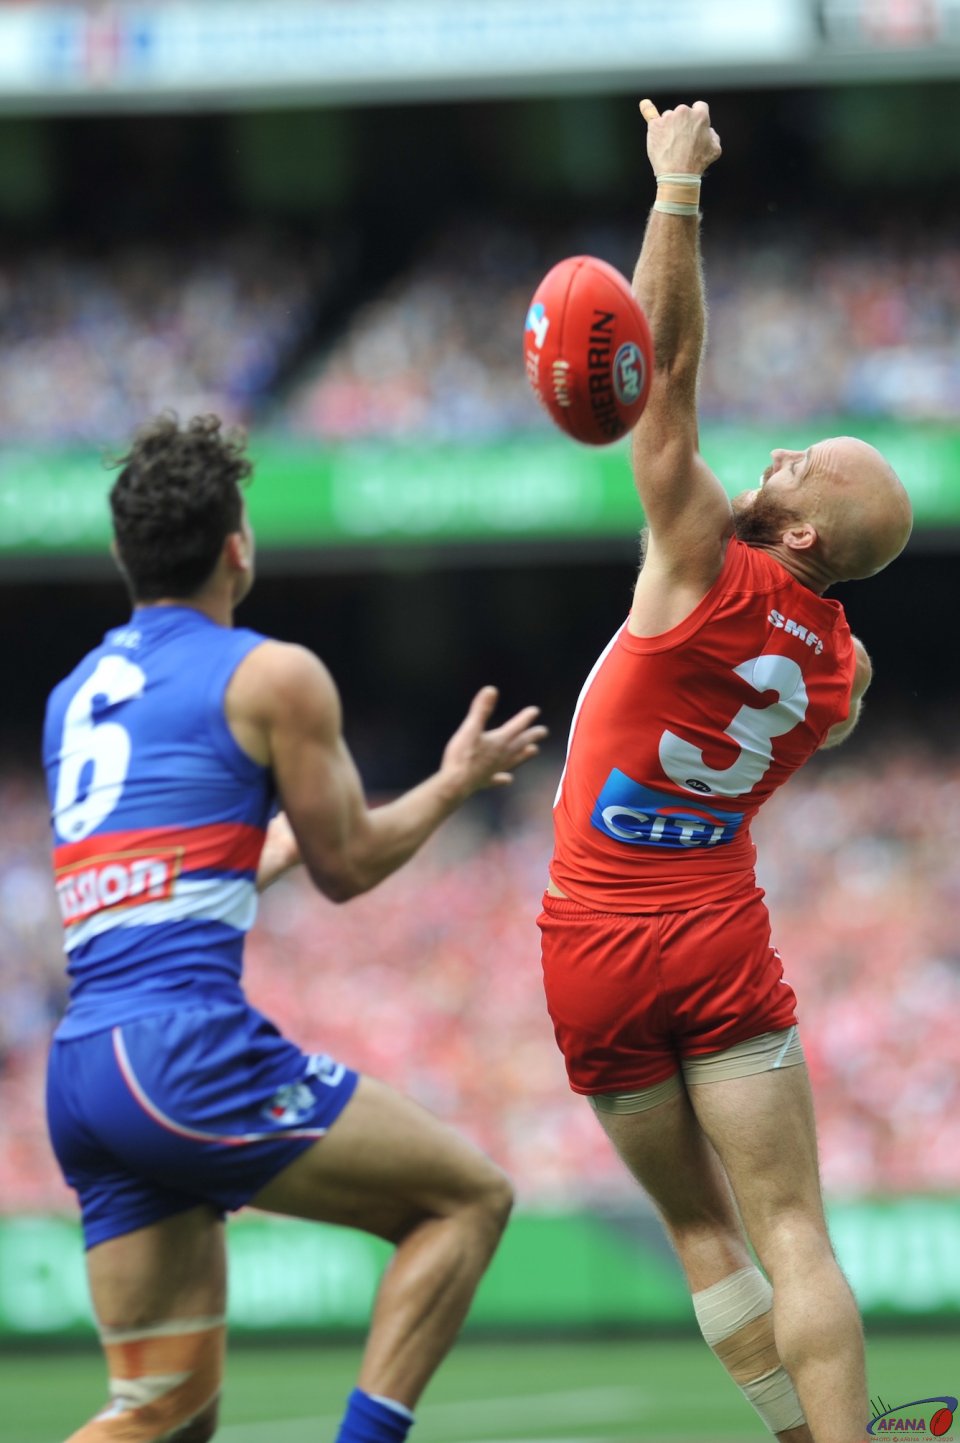 Dahlhaus marks the prefrectly weighted ball as McVeigh is unable to spoil